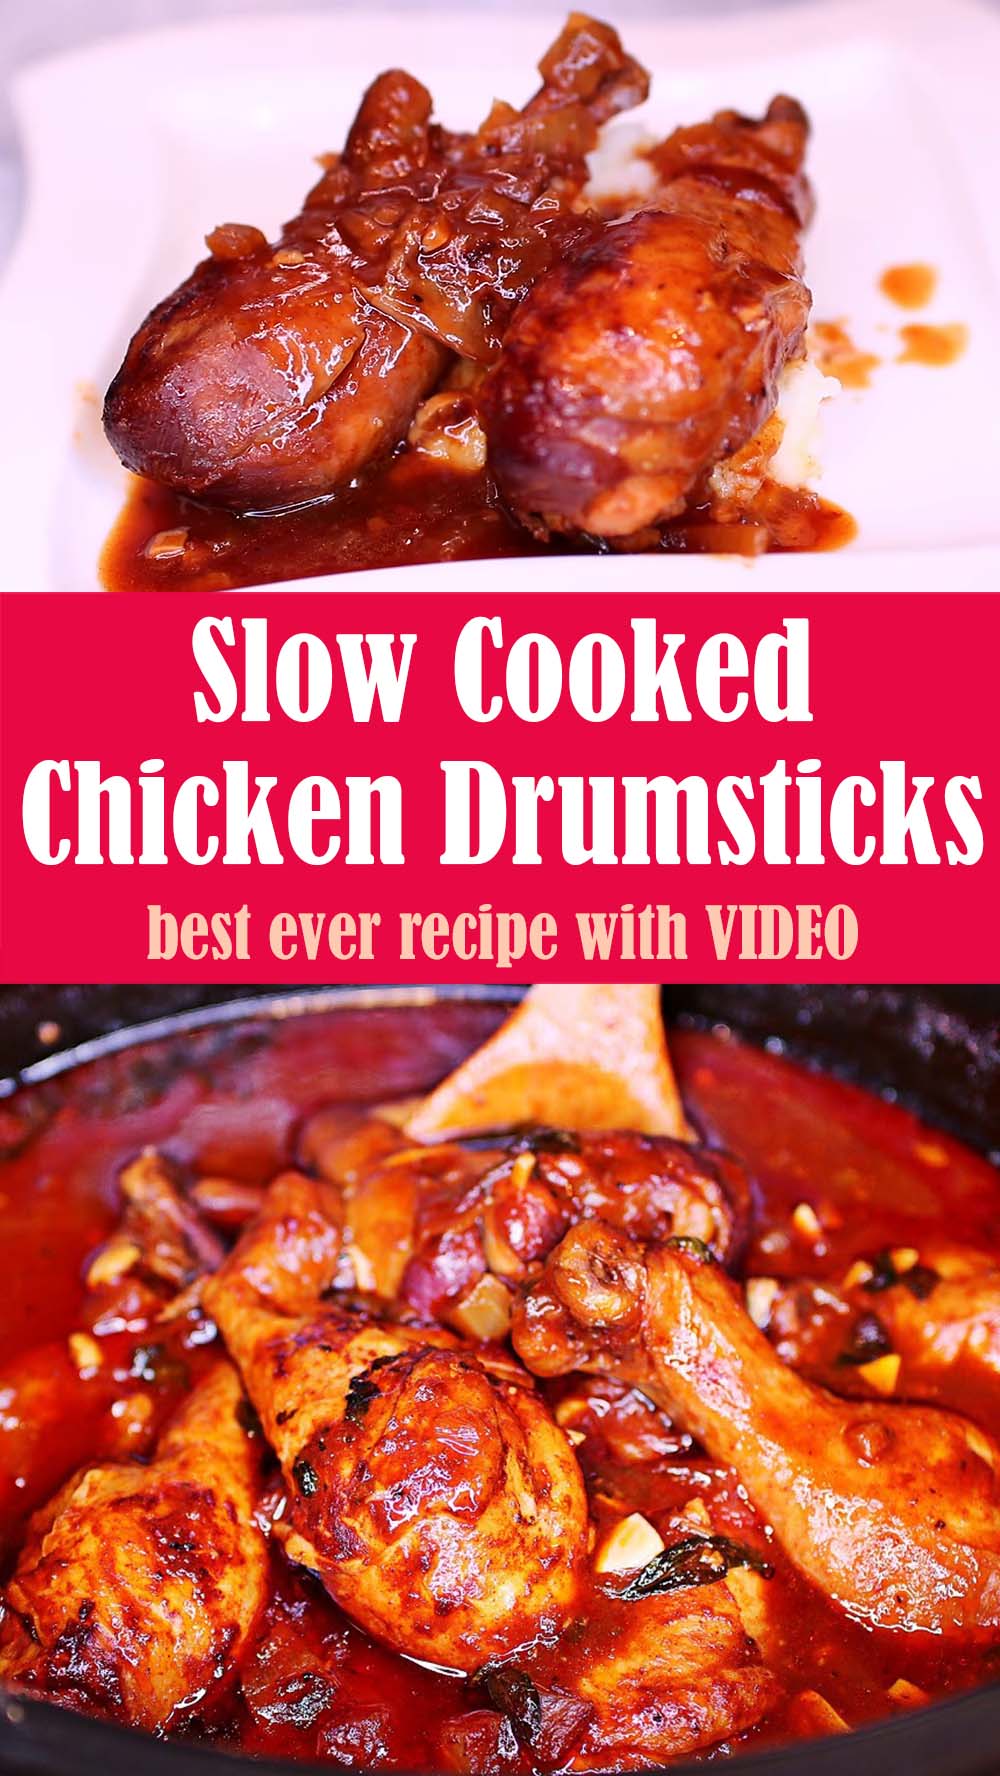 Delicious Slow Cooked Chicken Drumsticks